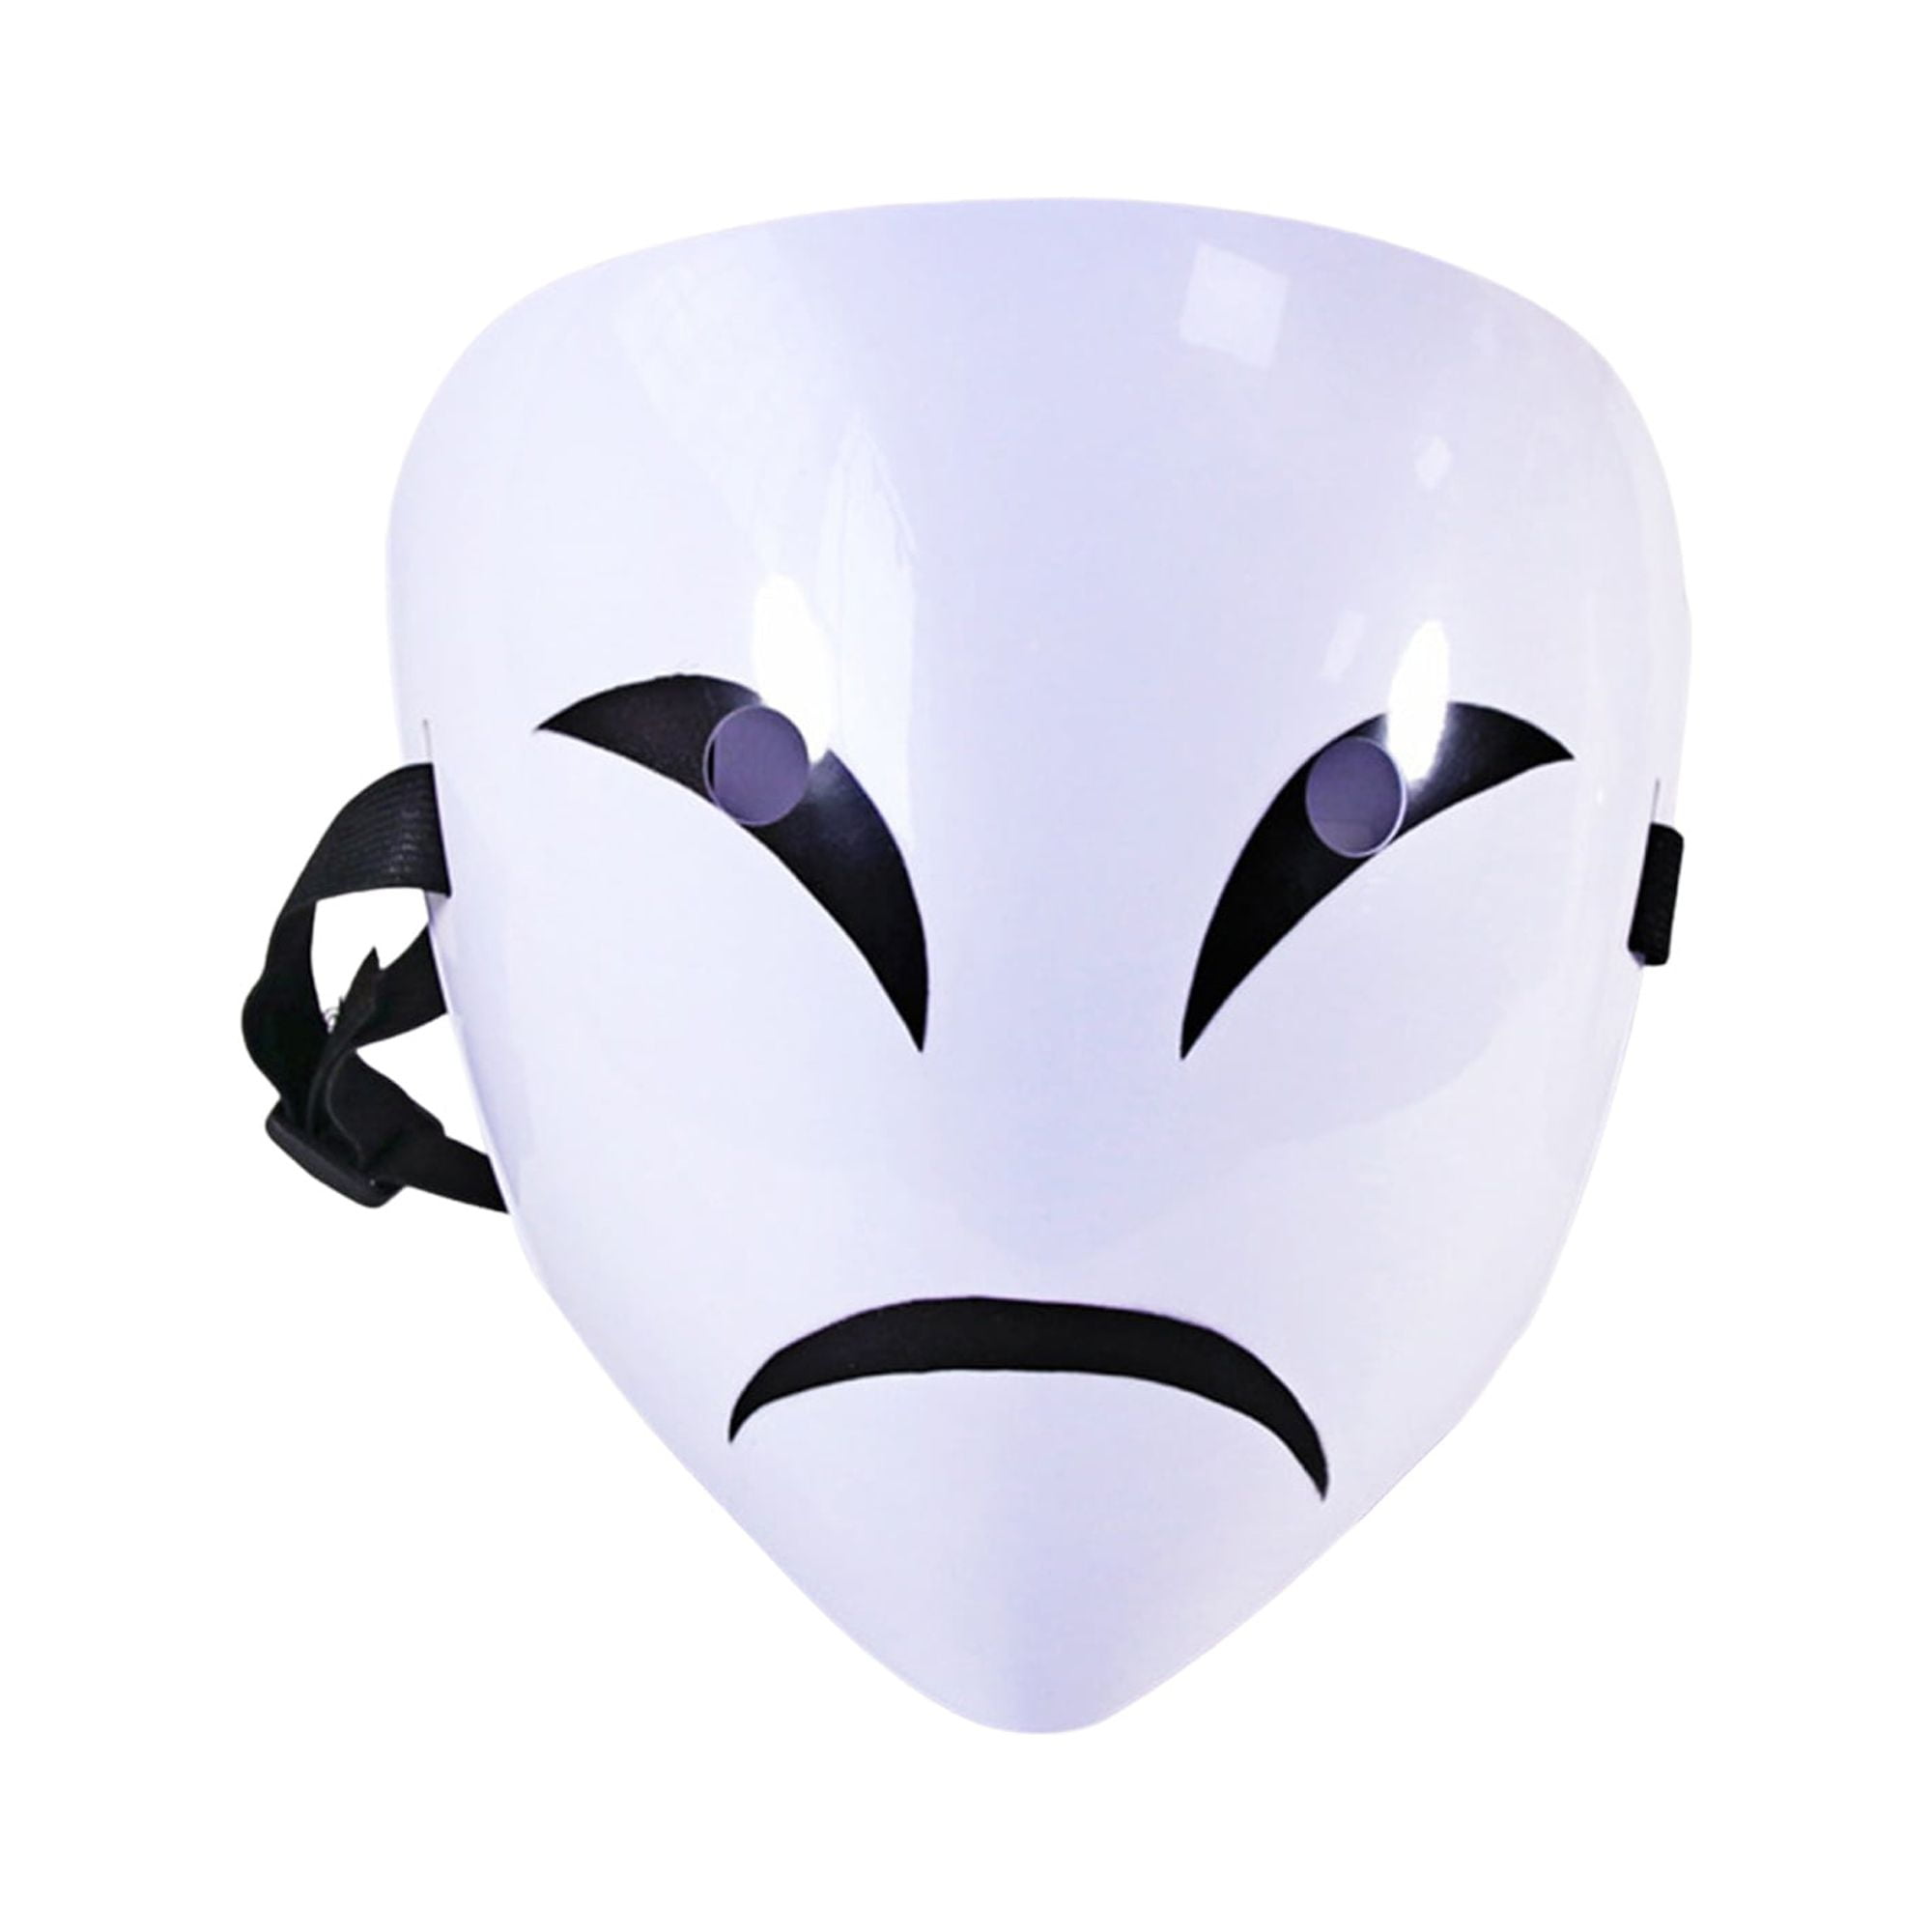 Adjustable Mask Adults Japanese Anime Black Bullet Hiruko White Visible  Helmet Cosplay Costume Props Halloween Gifts Collection